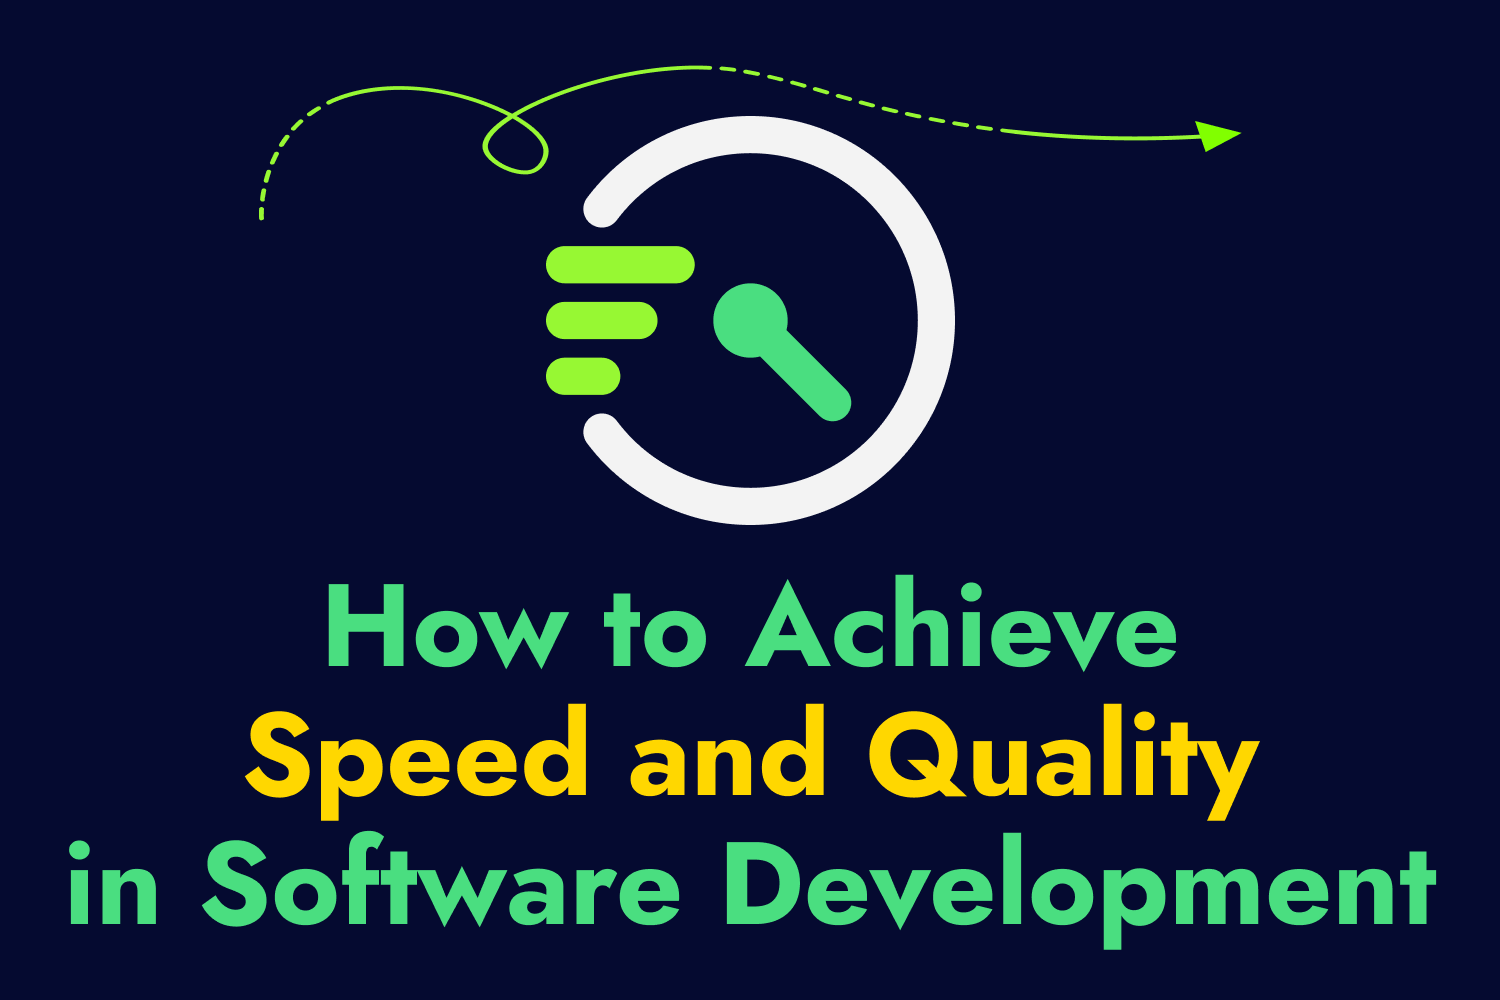 How to Achieve Speed and Quality in Software Development